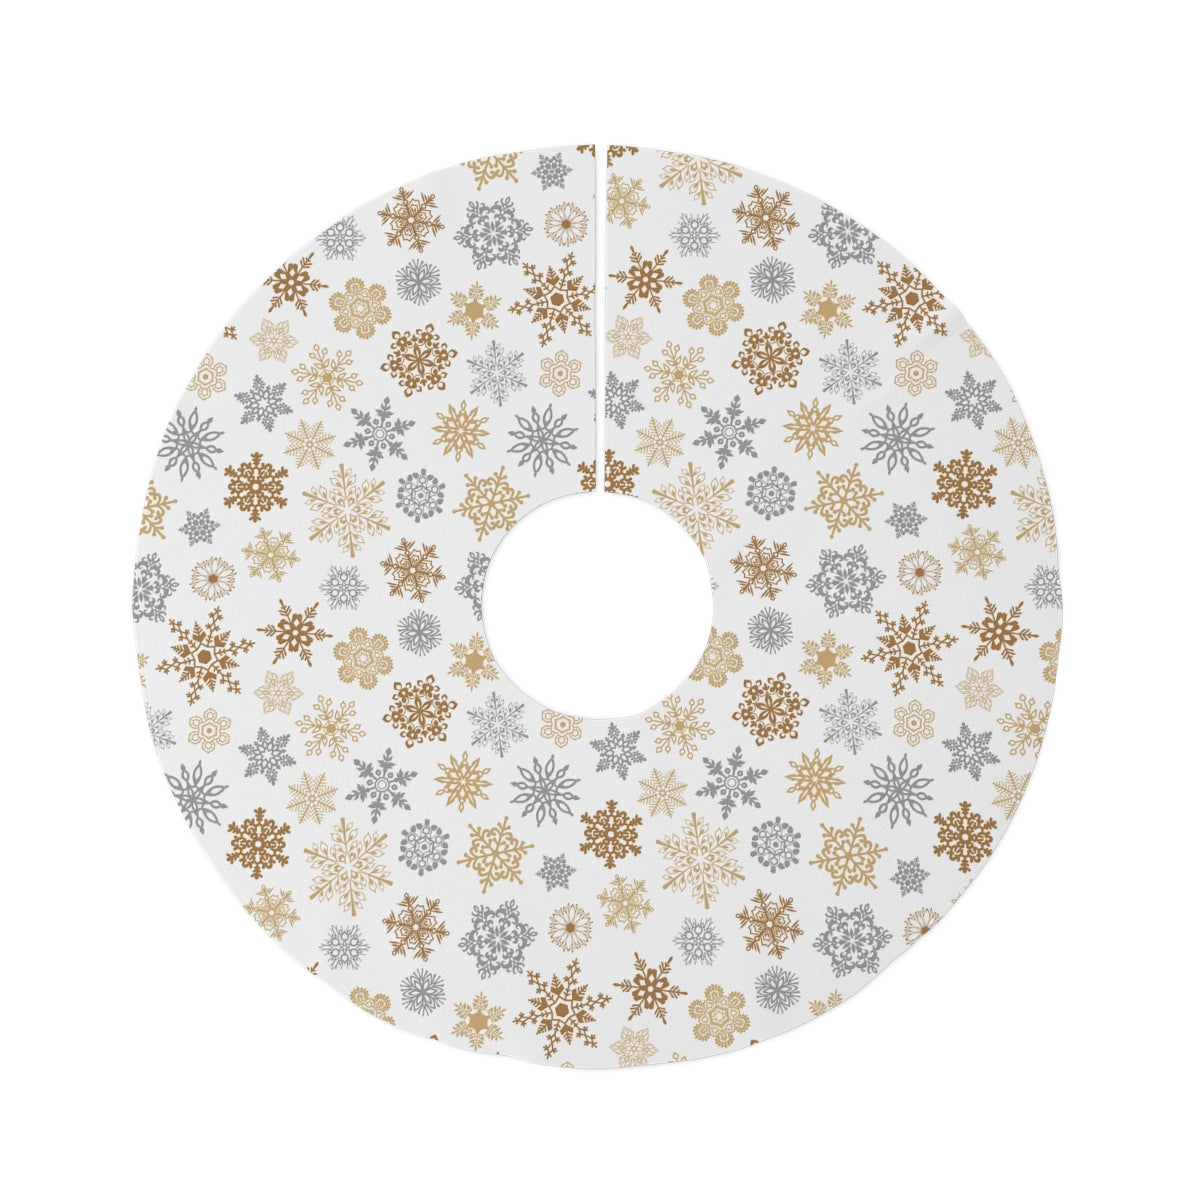 Gold and Silver Snowflakes Round Tree Skirt